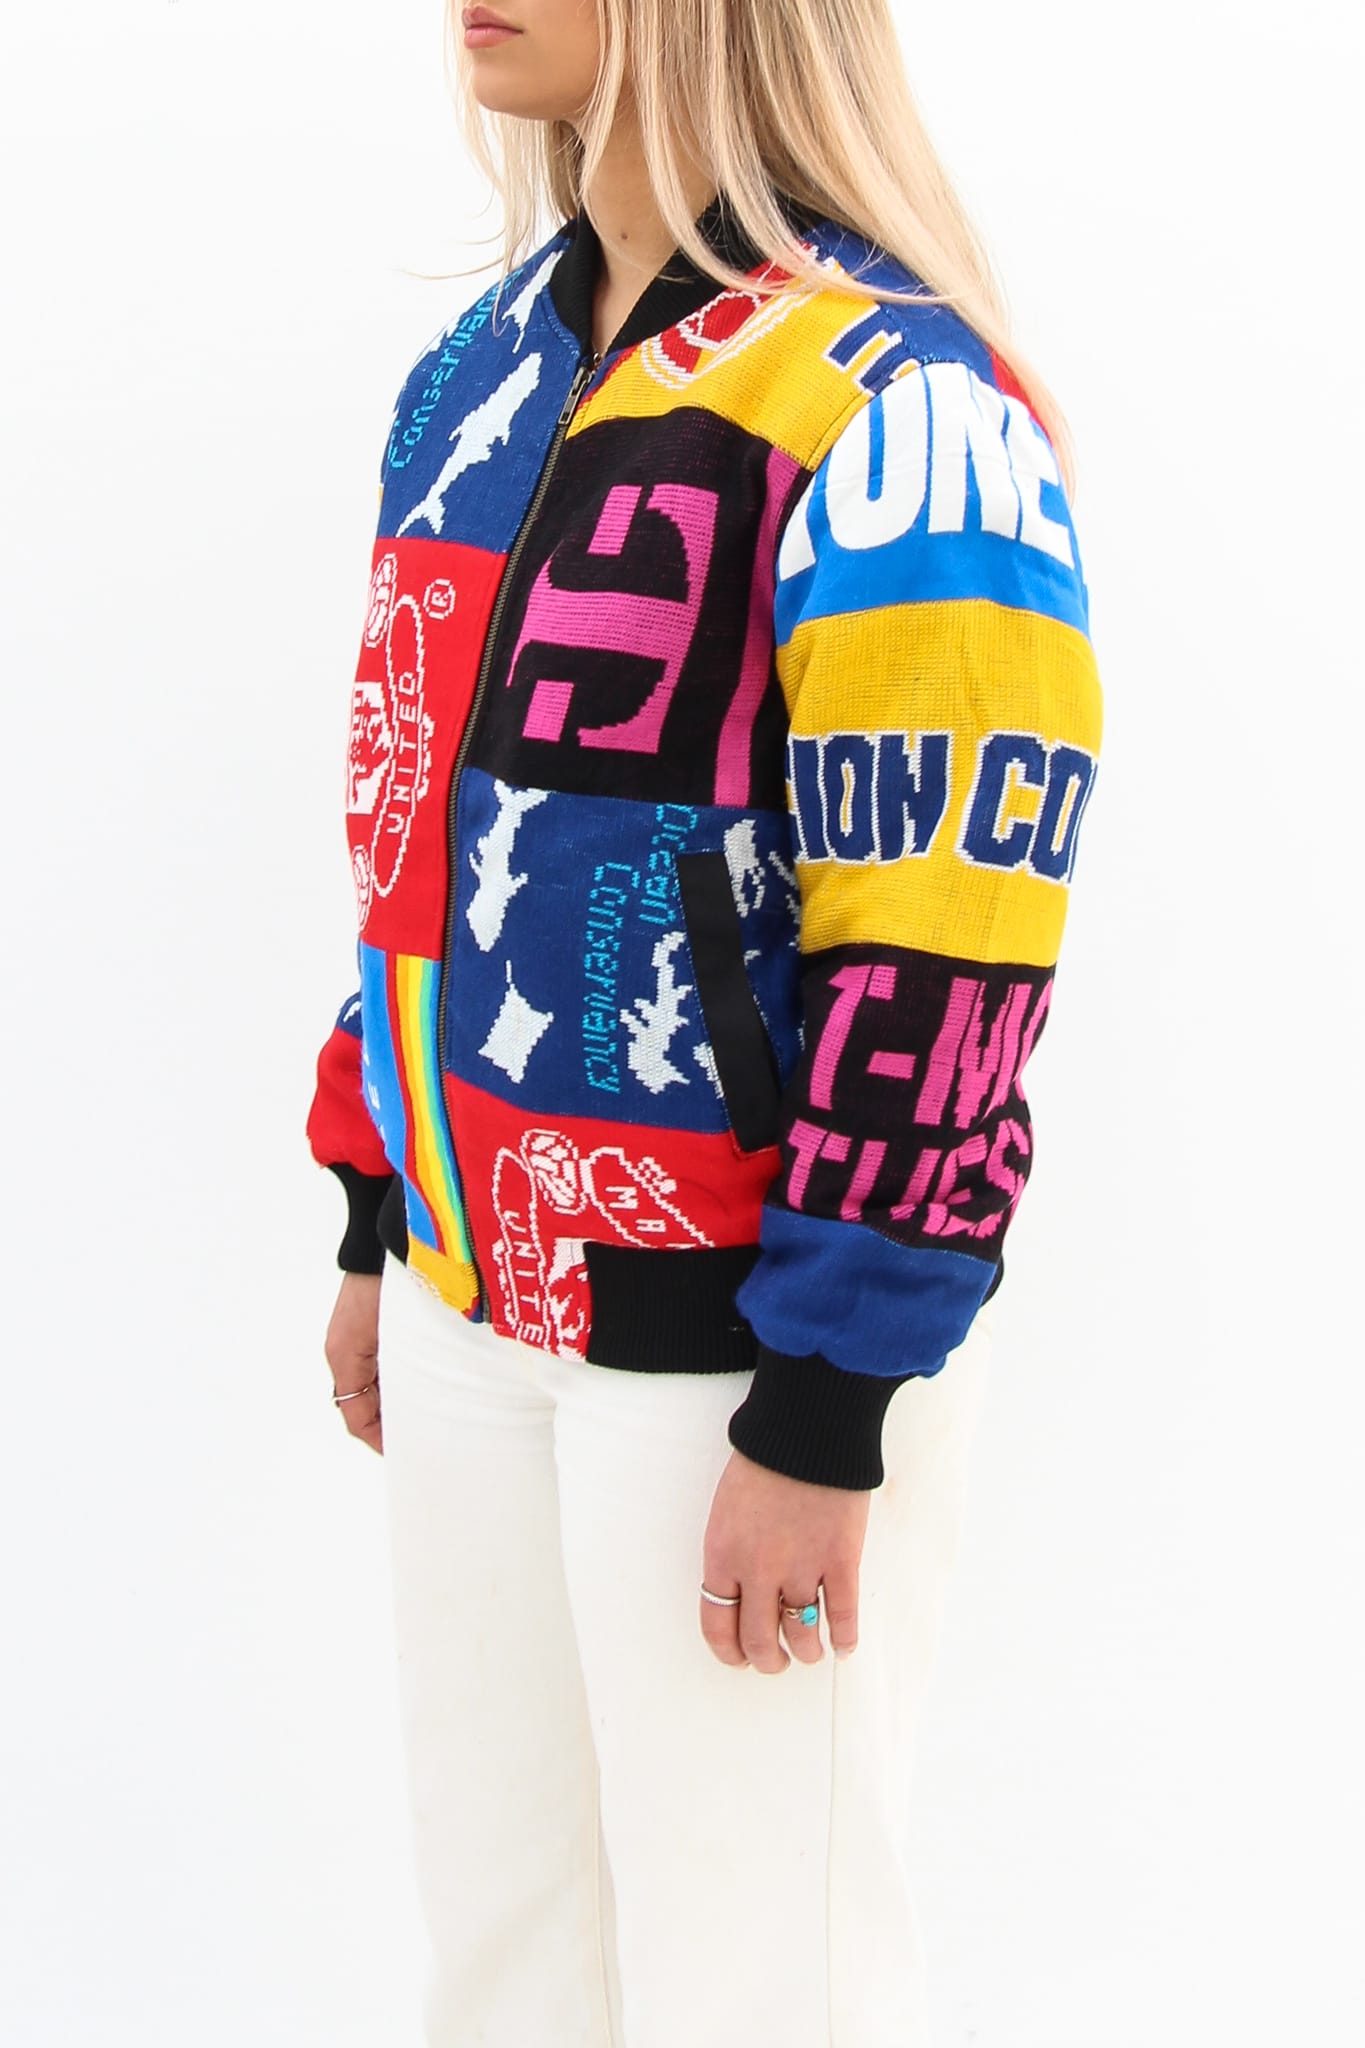 AM Re-Worked Football Scarf Jacket #2 - American Madness